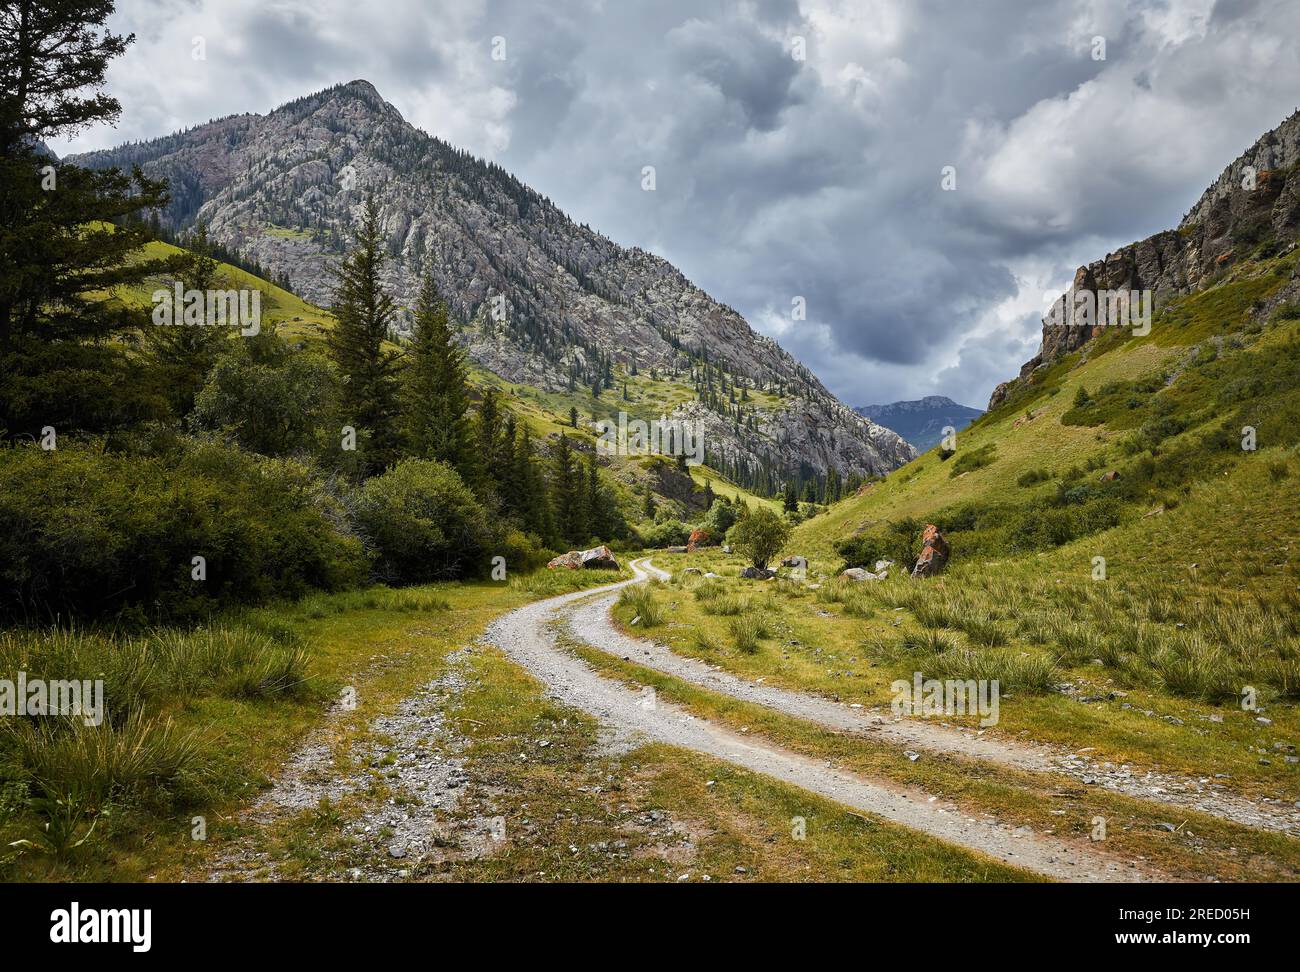 Country road at beautiful scenery of green hills in the mountain rocky valley and green lush meadow at cloudy storm sky and rain in Kazakhstan Stock Photo